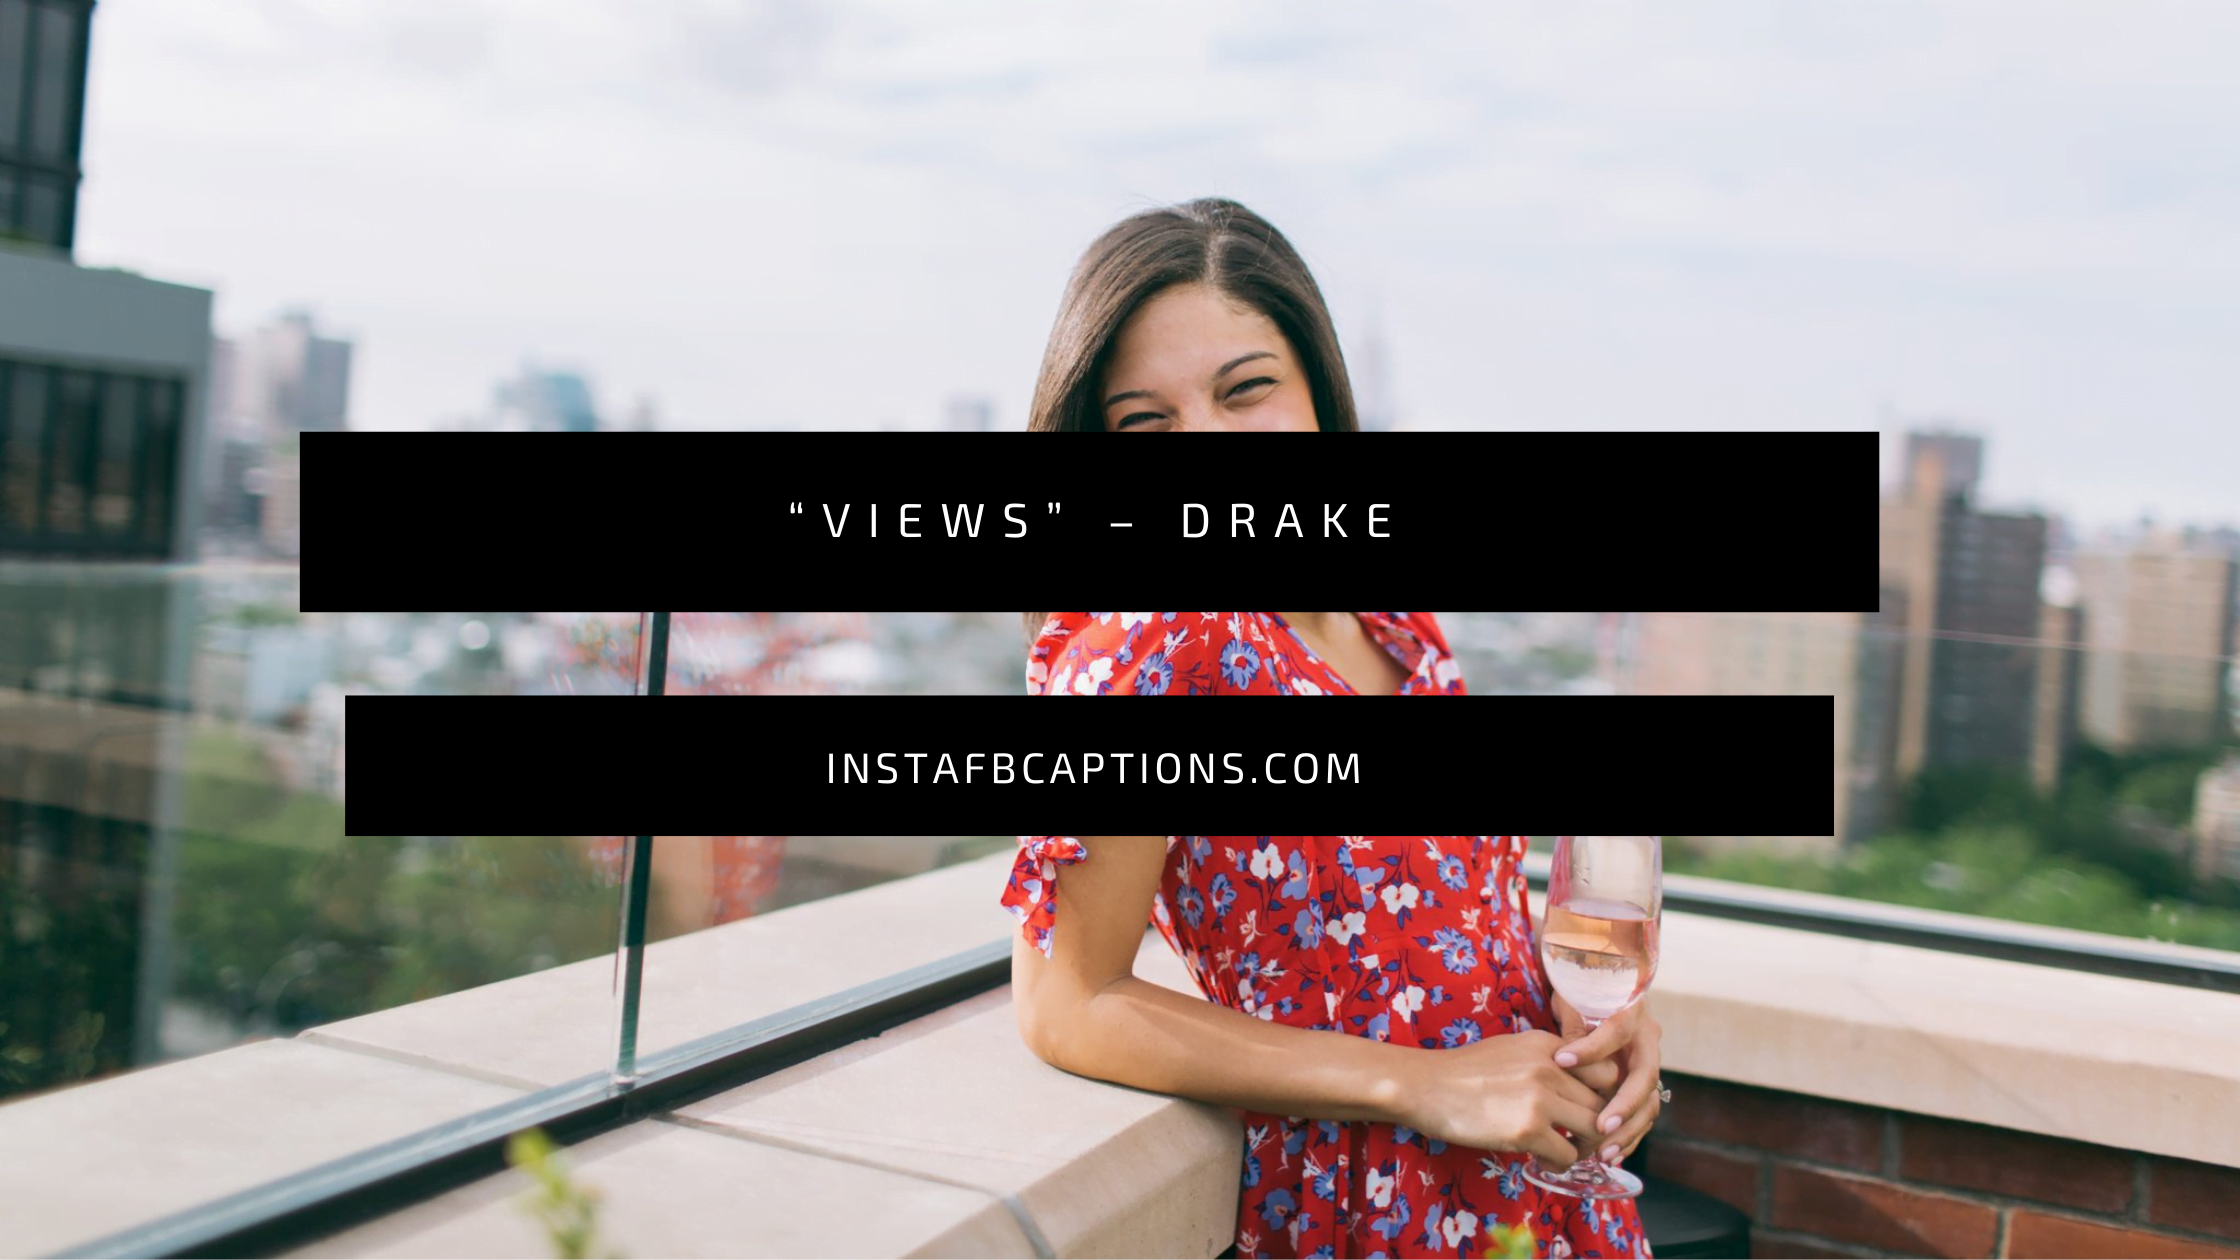 Quotes Related To Roofto  - Quotes Related to Rooftop - 99 Rooftop Instagram Captions for Height View in 2022